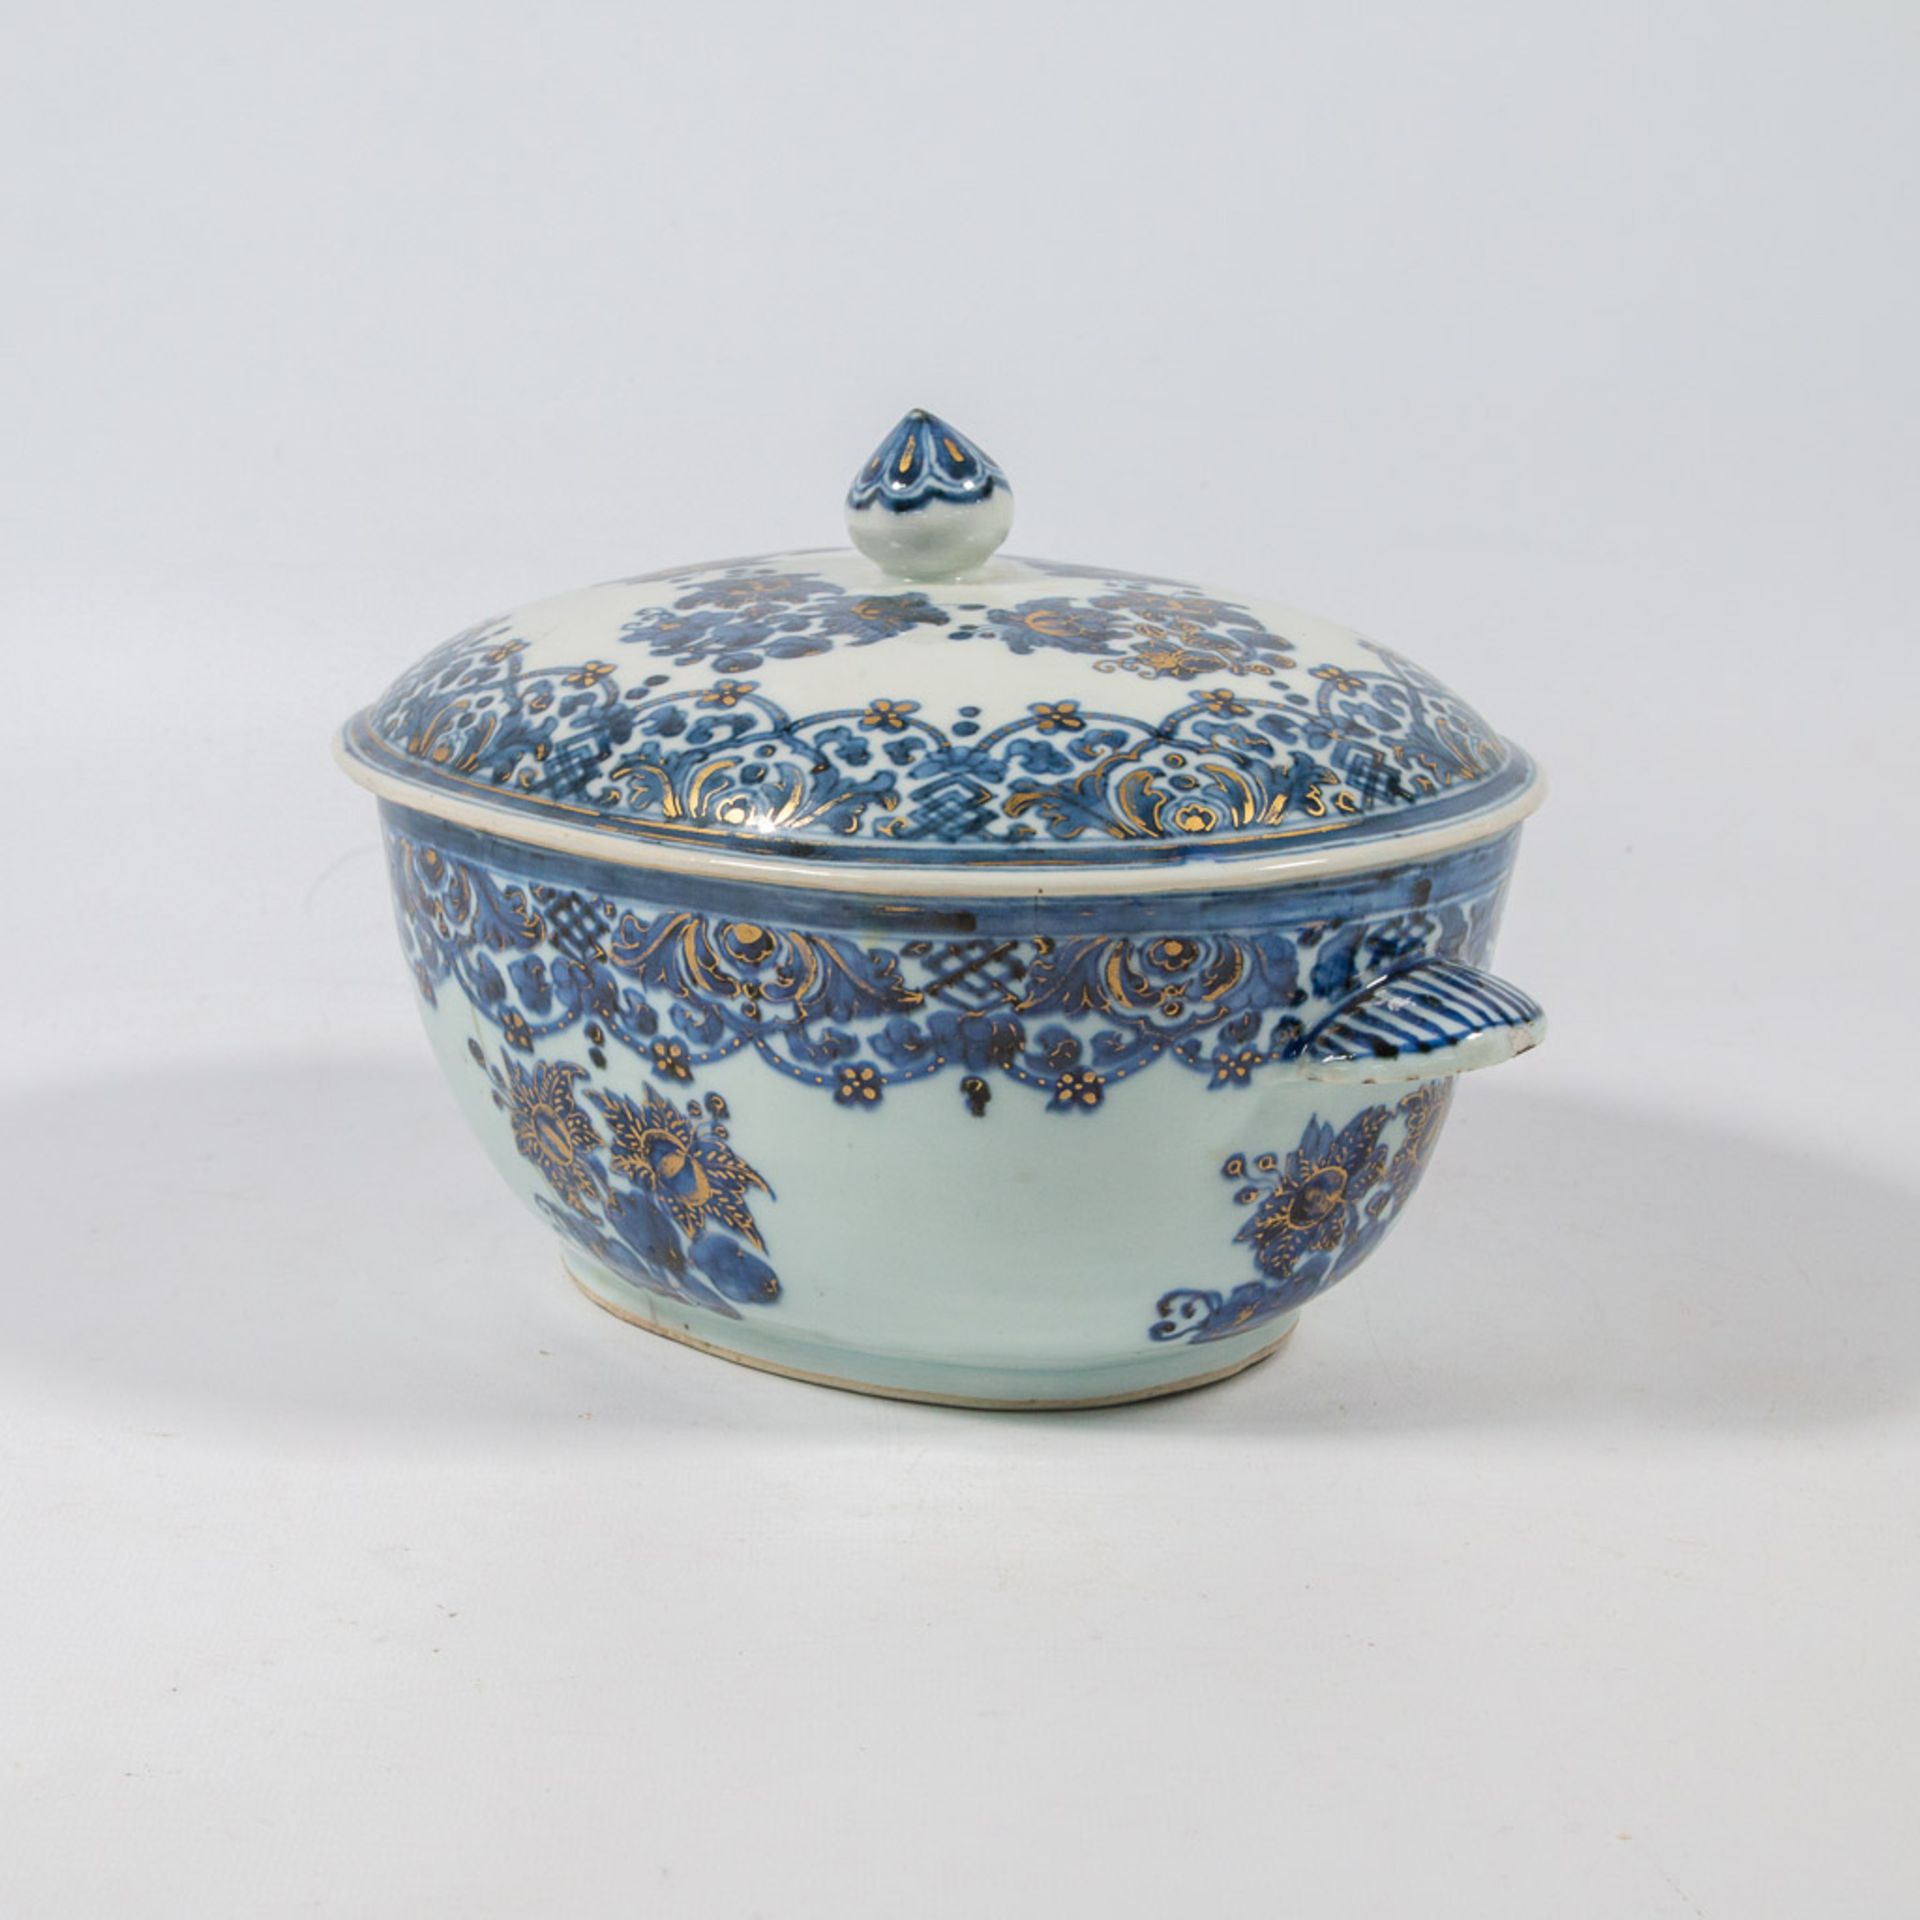 A small tureen with lid, Chinese export porcelain with underglaze blue, white and overglaze gold flo - Image 8 of 24